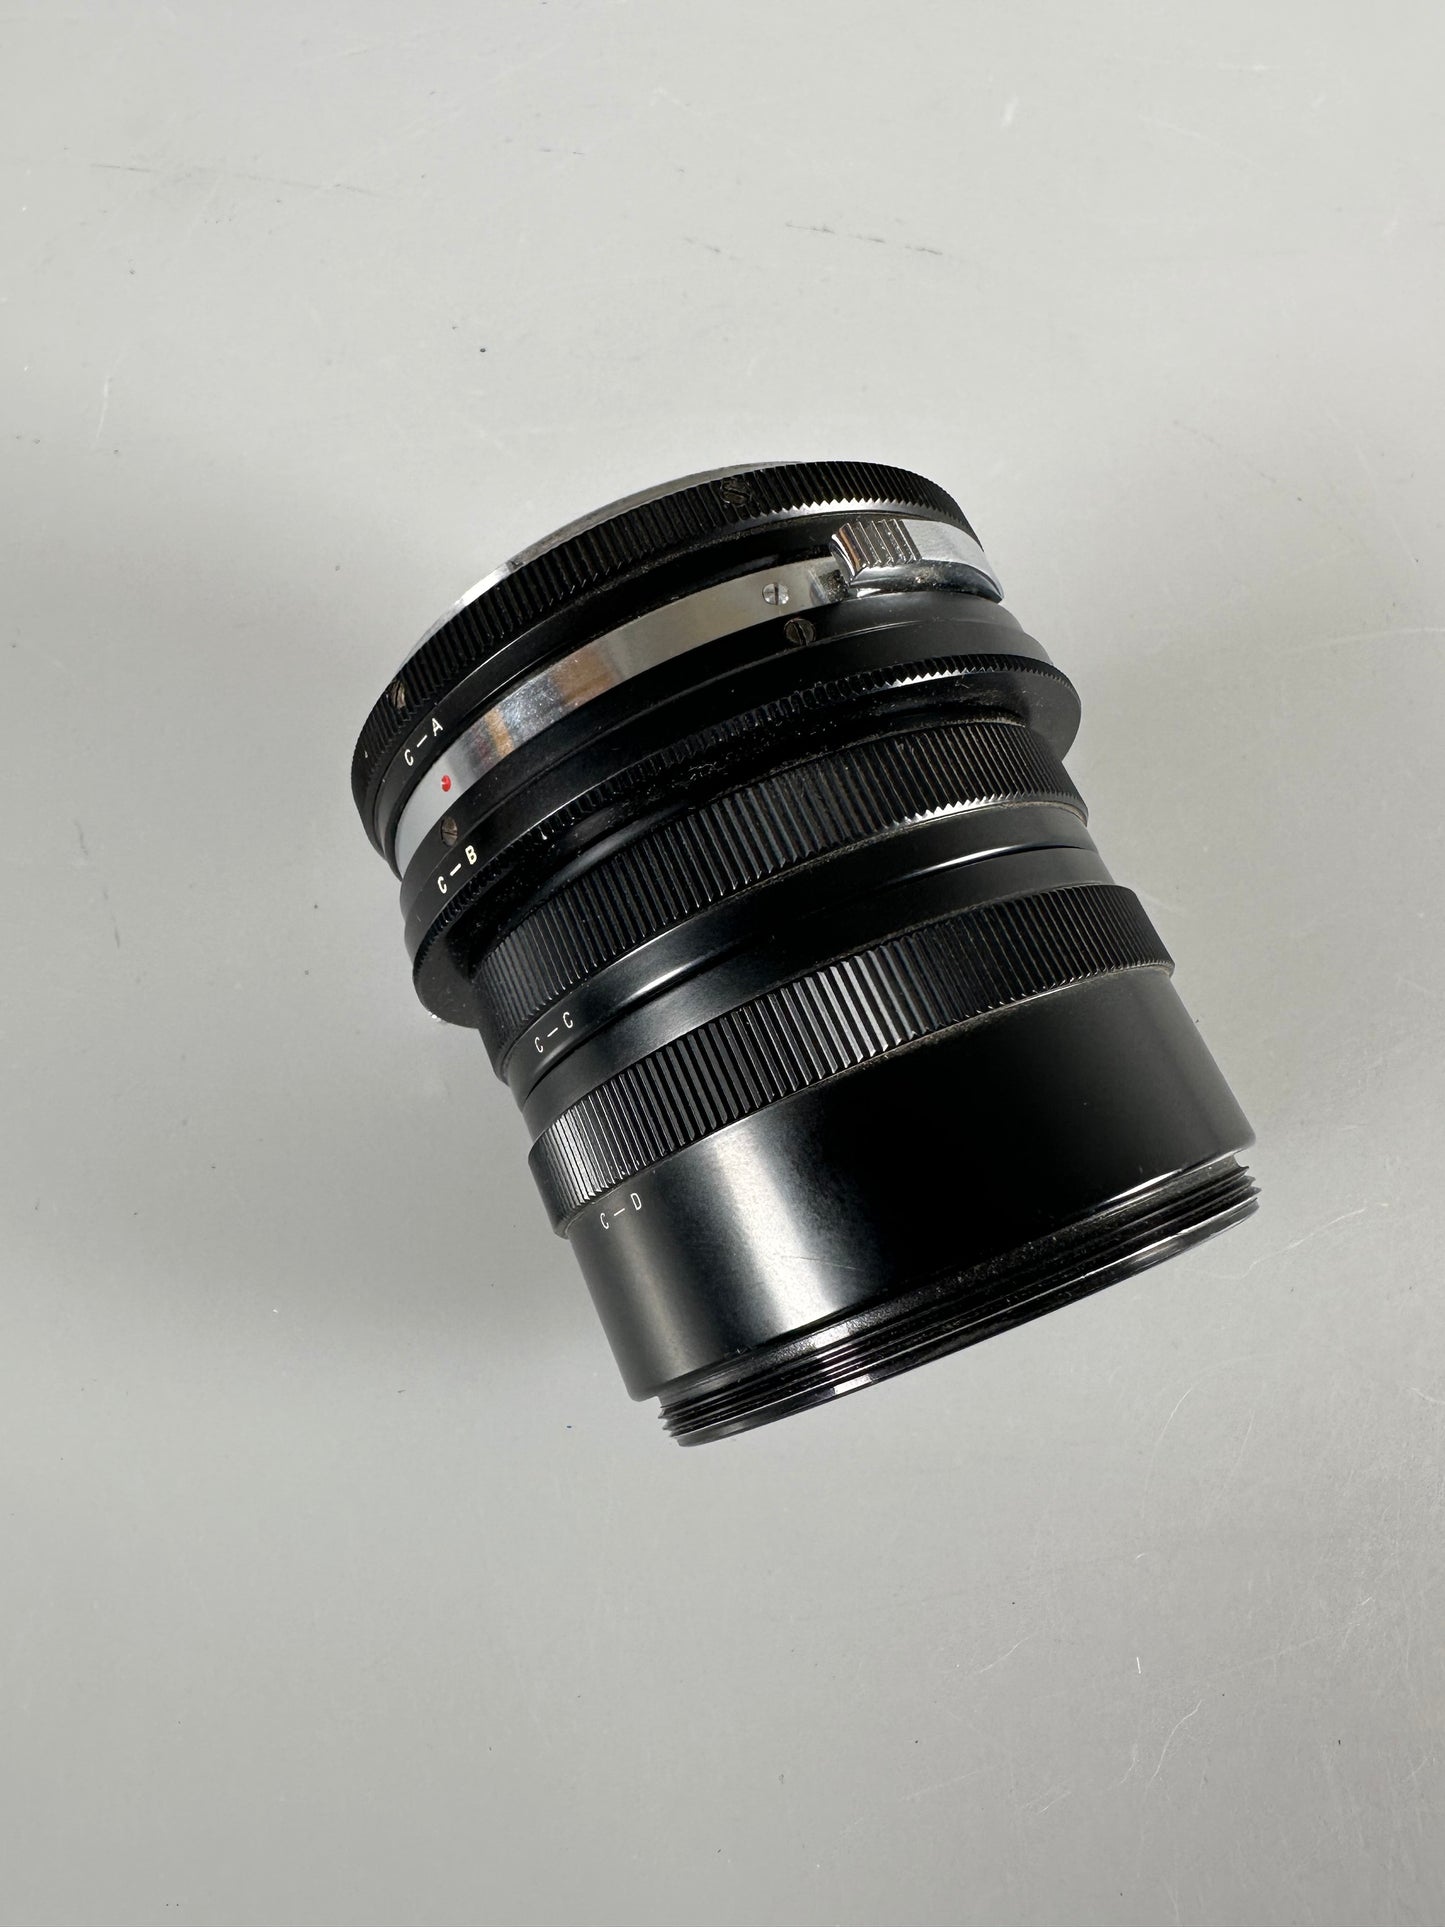 ZENZA Bronica Extension Tube Ring Set C-A C-B C-C C-D for S2 S